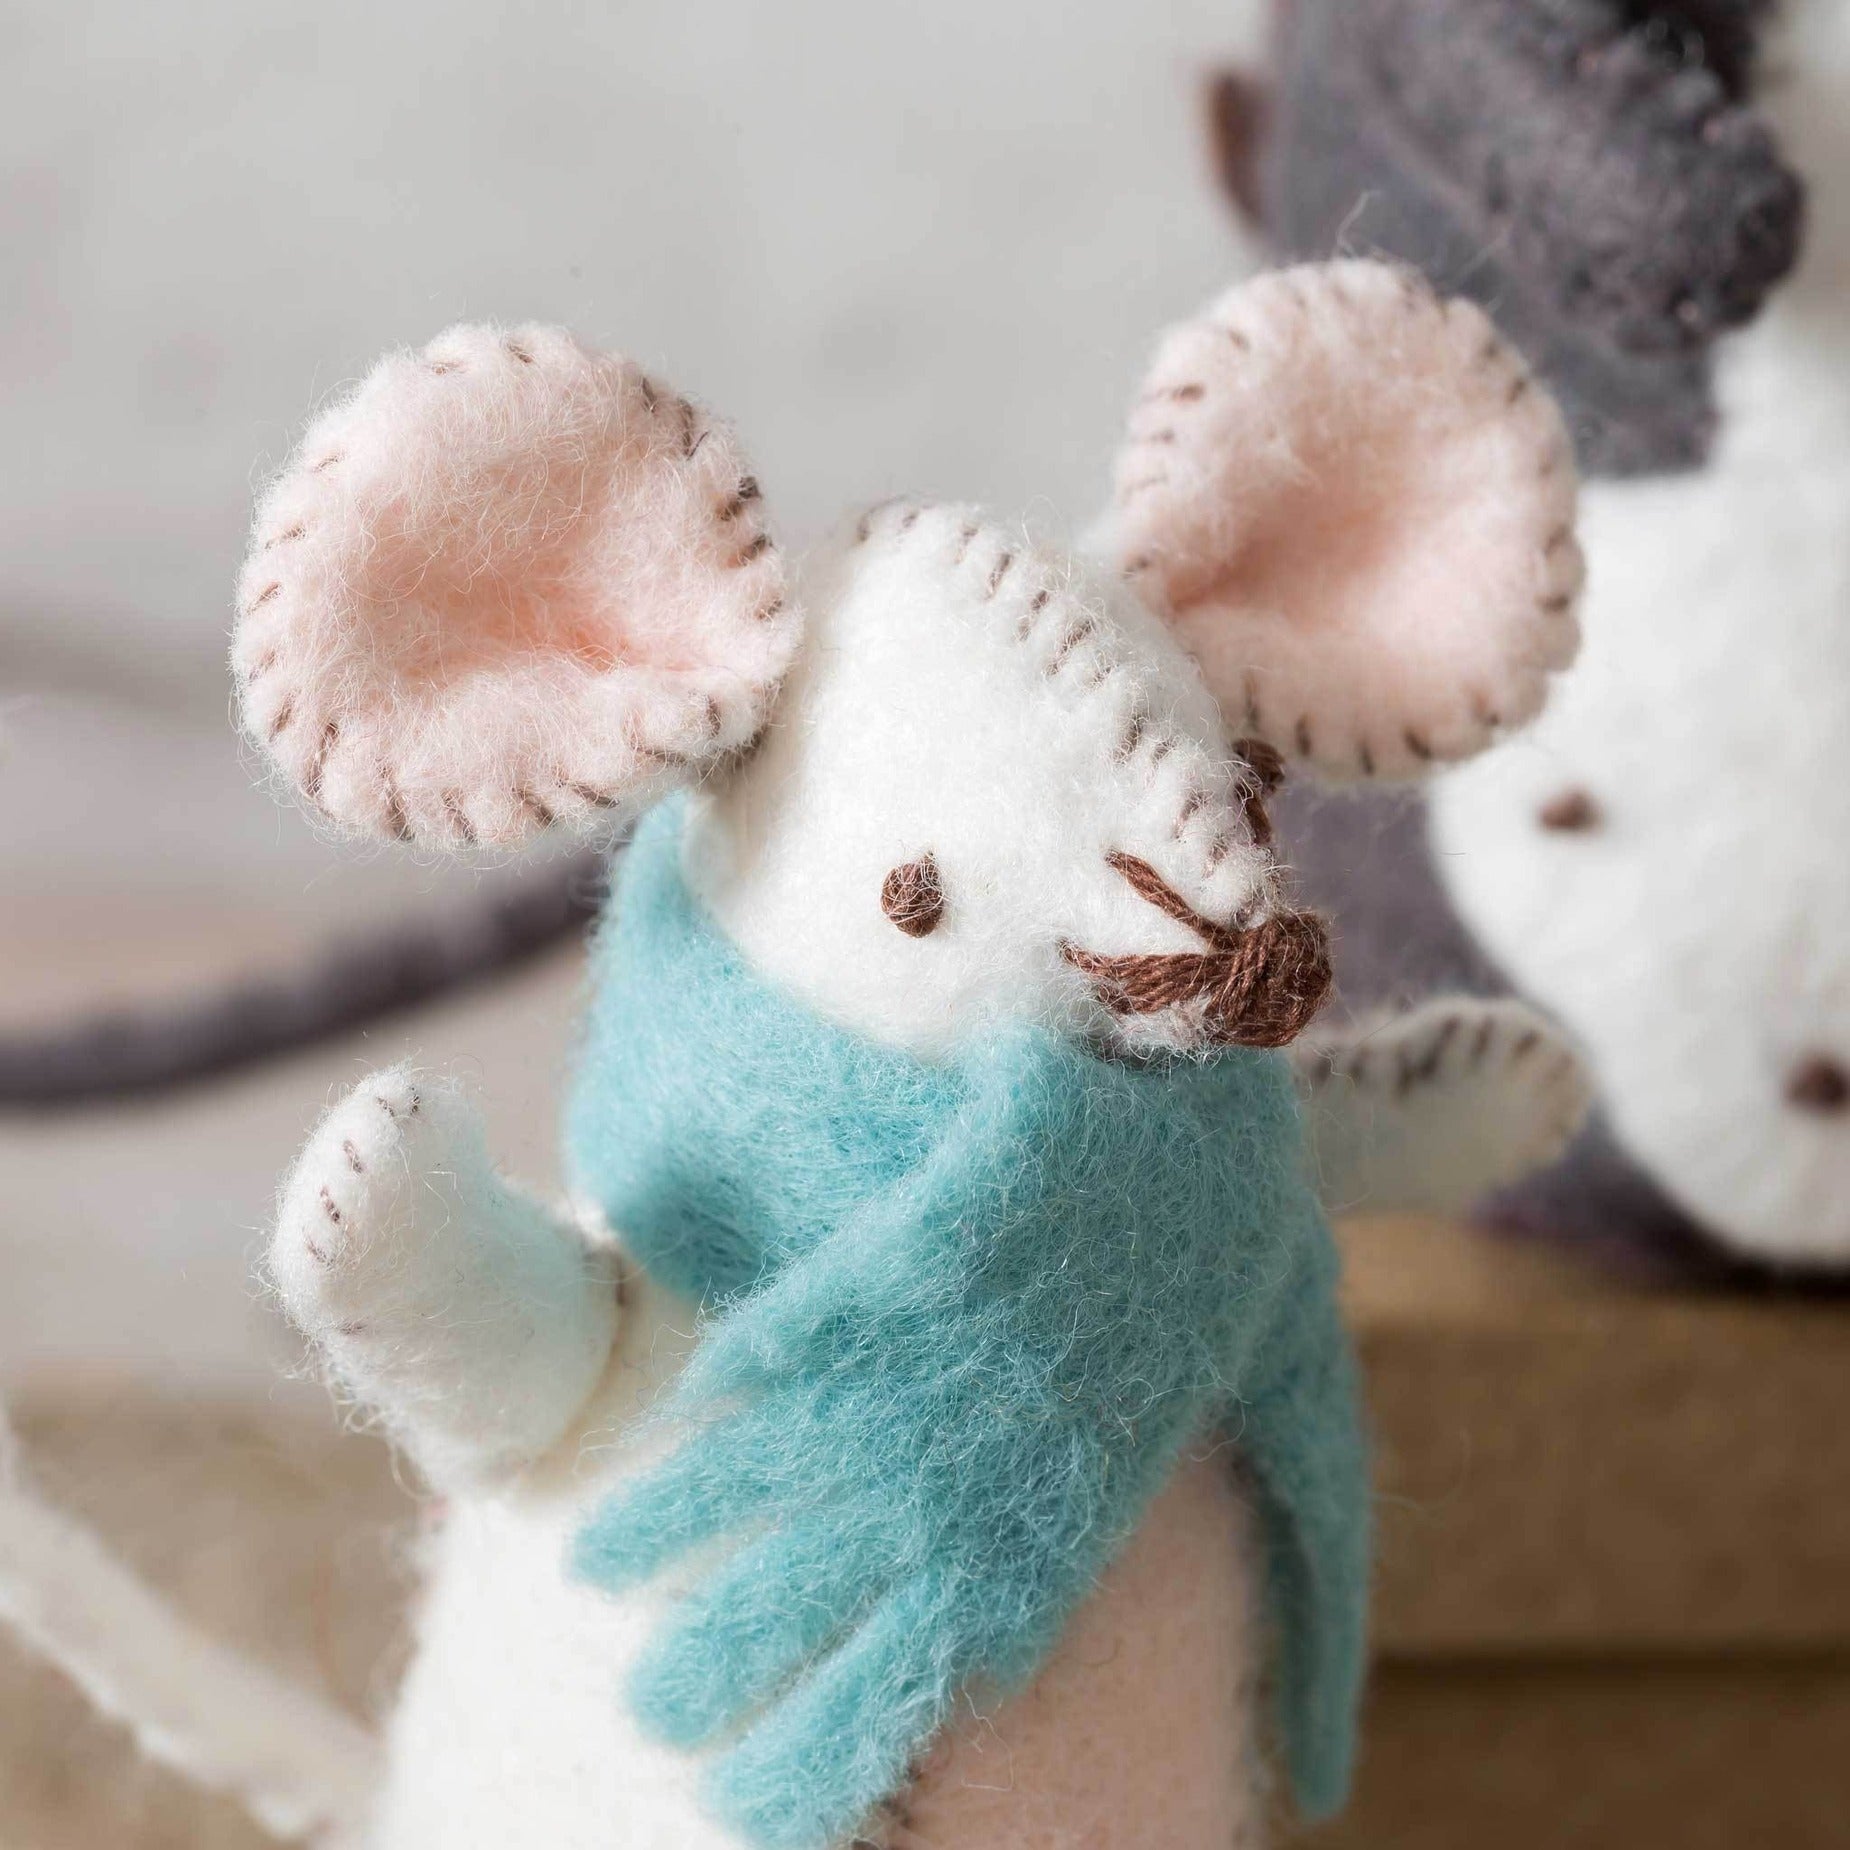 Close-up of a handcrafted white felt mouse with intricate stitching details, wearing a soft teal scarf, set against a muted background with hints of other felt creations.